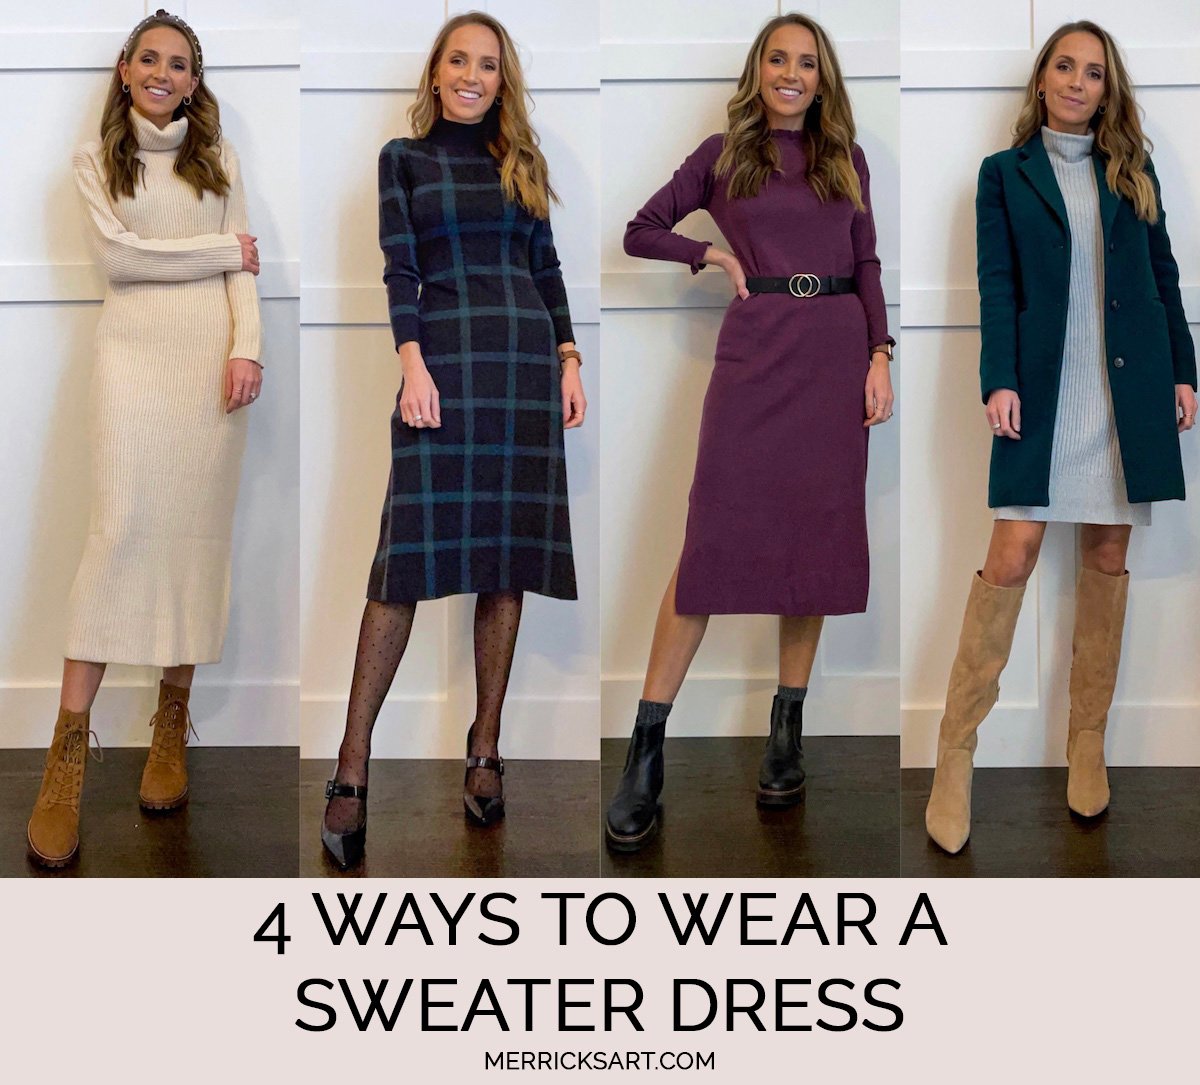 What Shoes to Wear With Sweater Dress